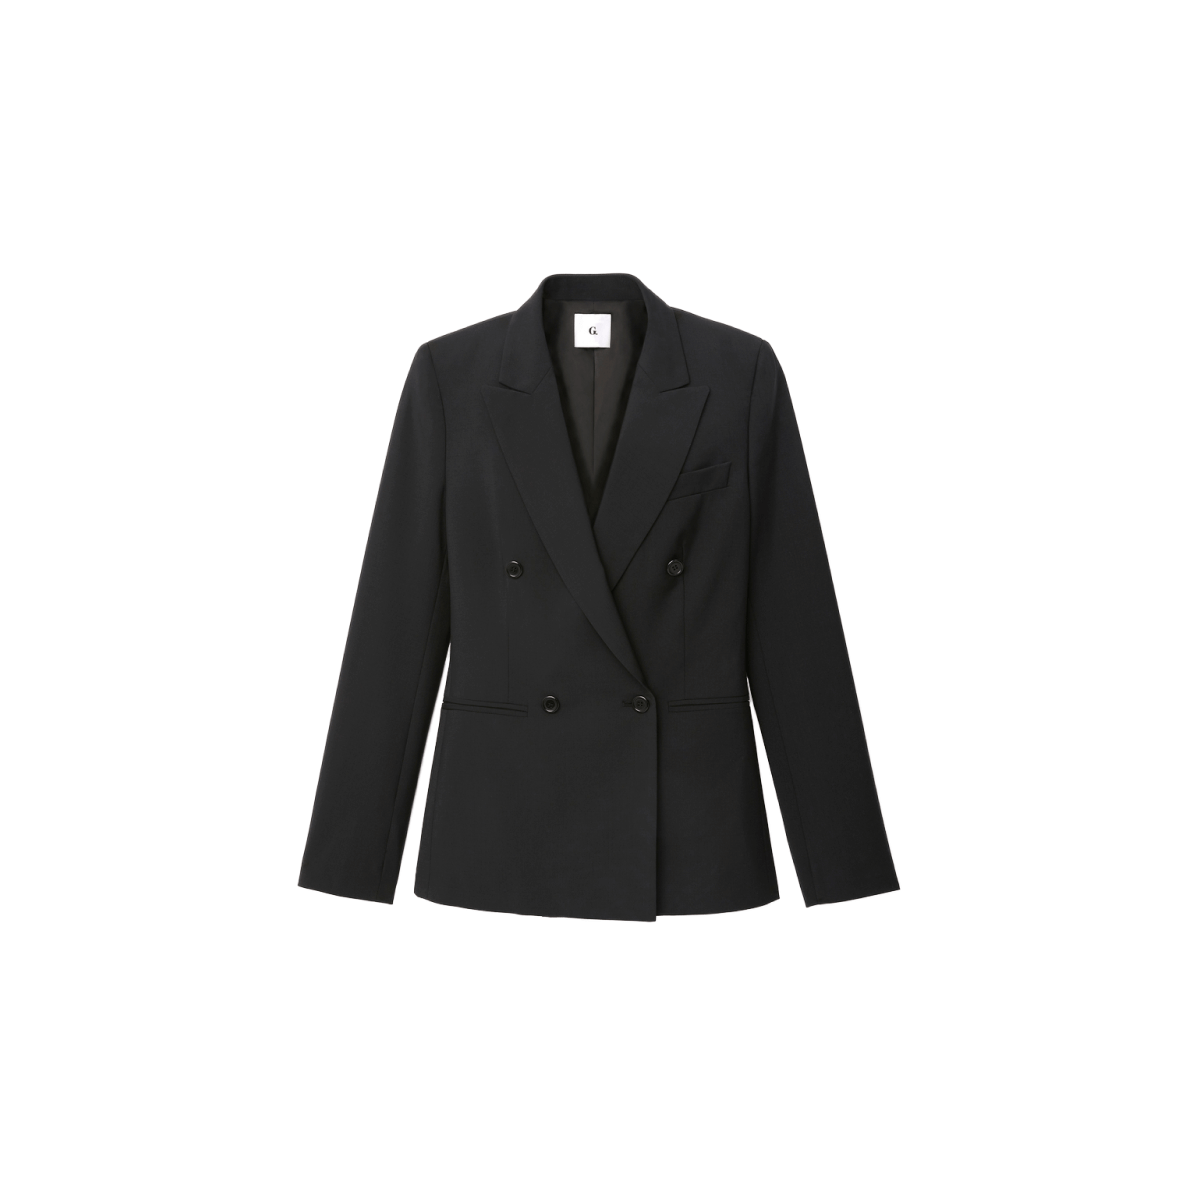 G. Label jonathan double-breasted blazer